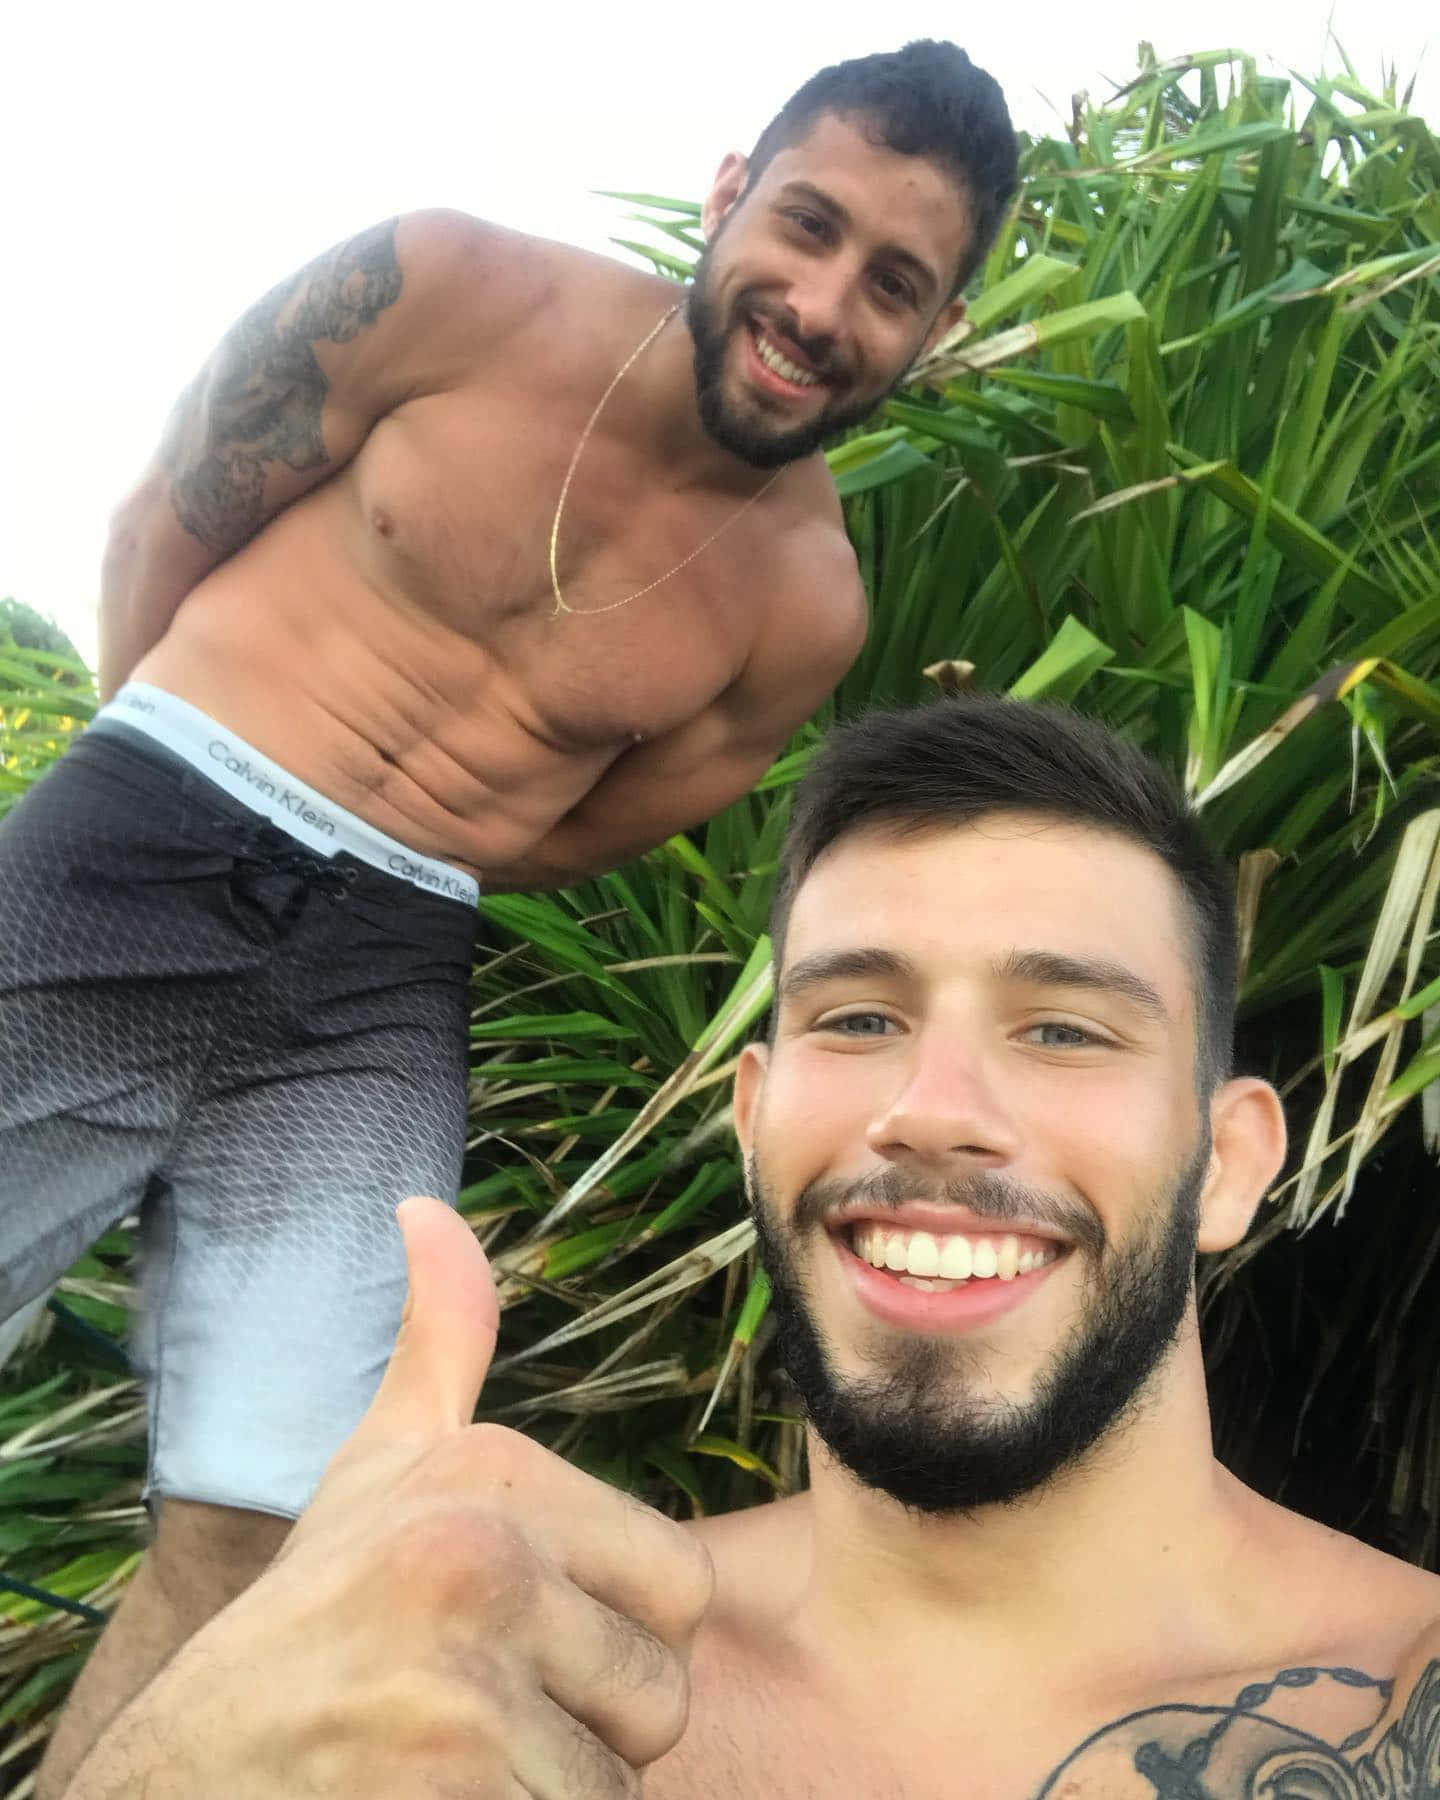 Matheus Nicolau And Friend In Grassy Background Wallpaper